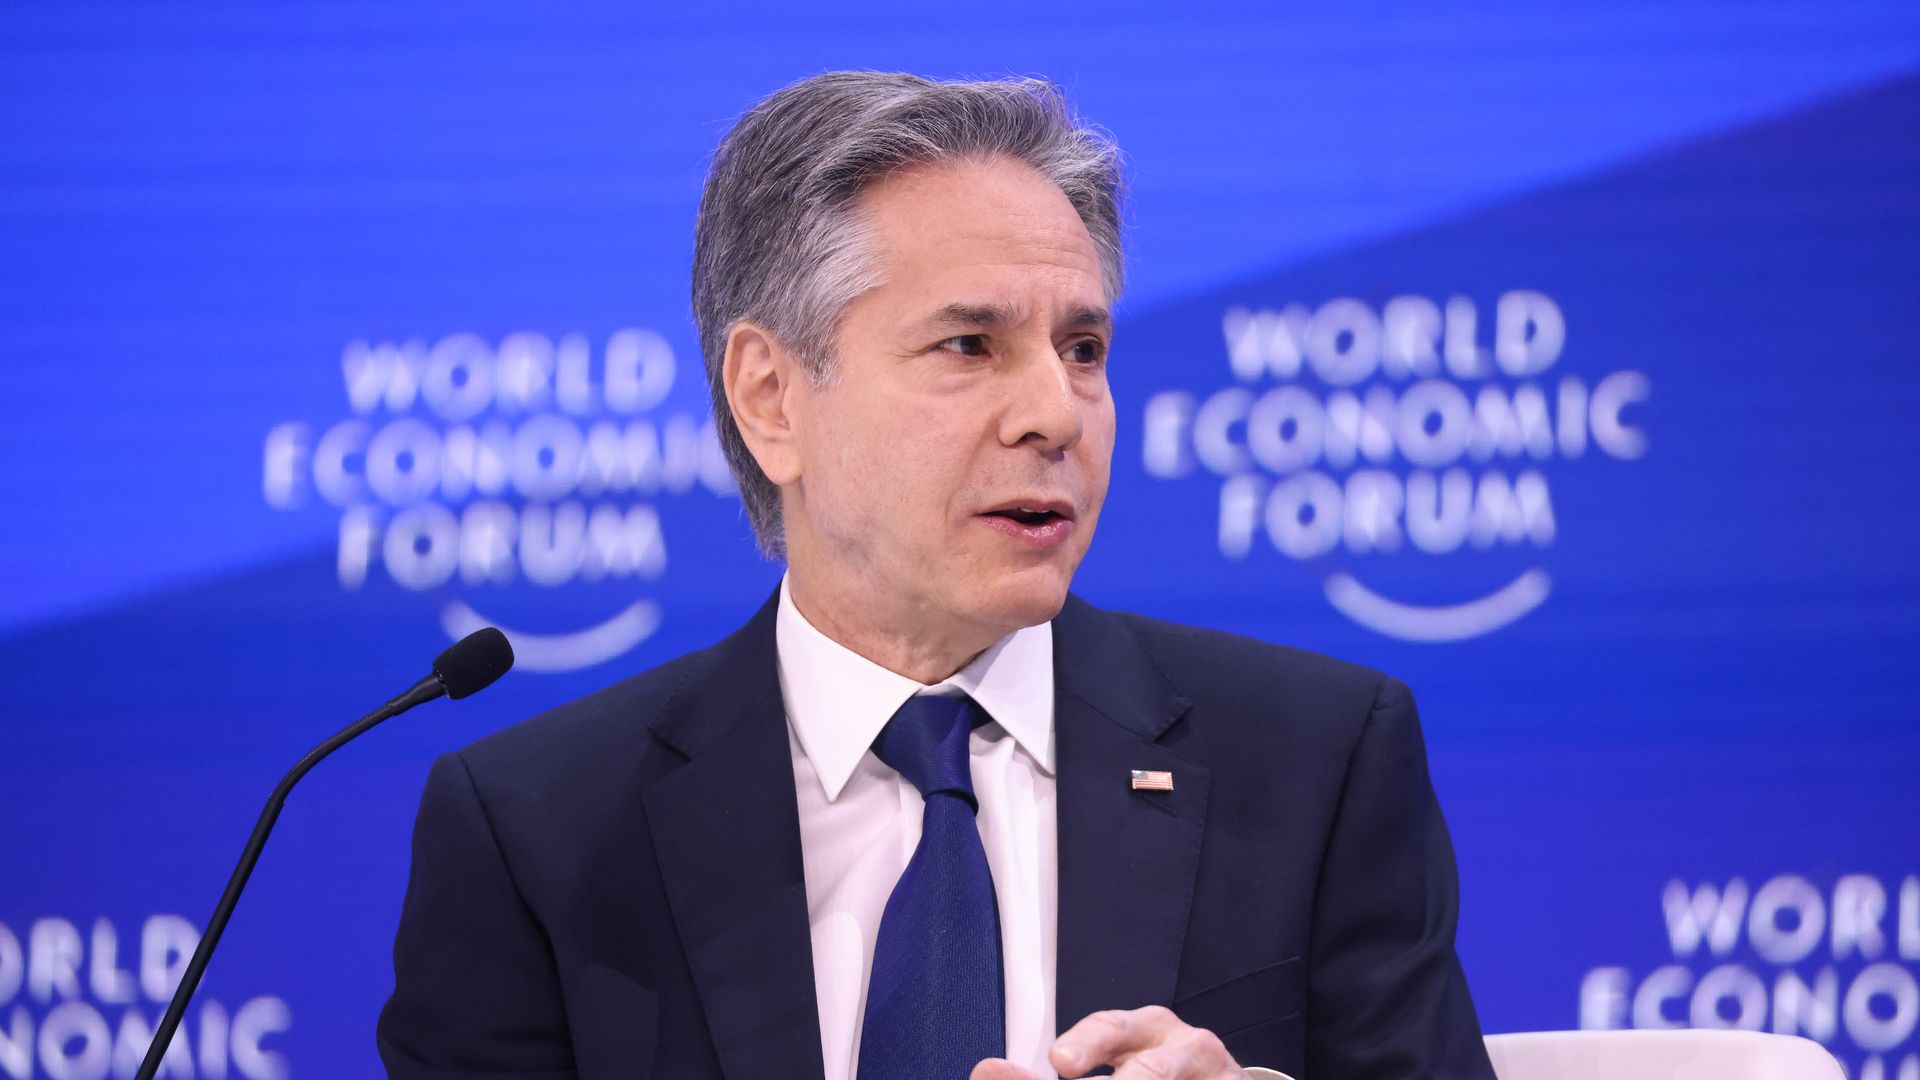 U.S. Secretary of State Tony Blinken during a conversation session at the World Economic Forum on Jan. 17. Photo: Hollie Adams/Bloomberg via Getty Images